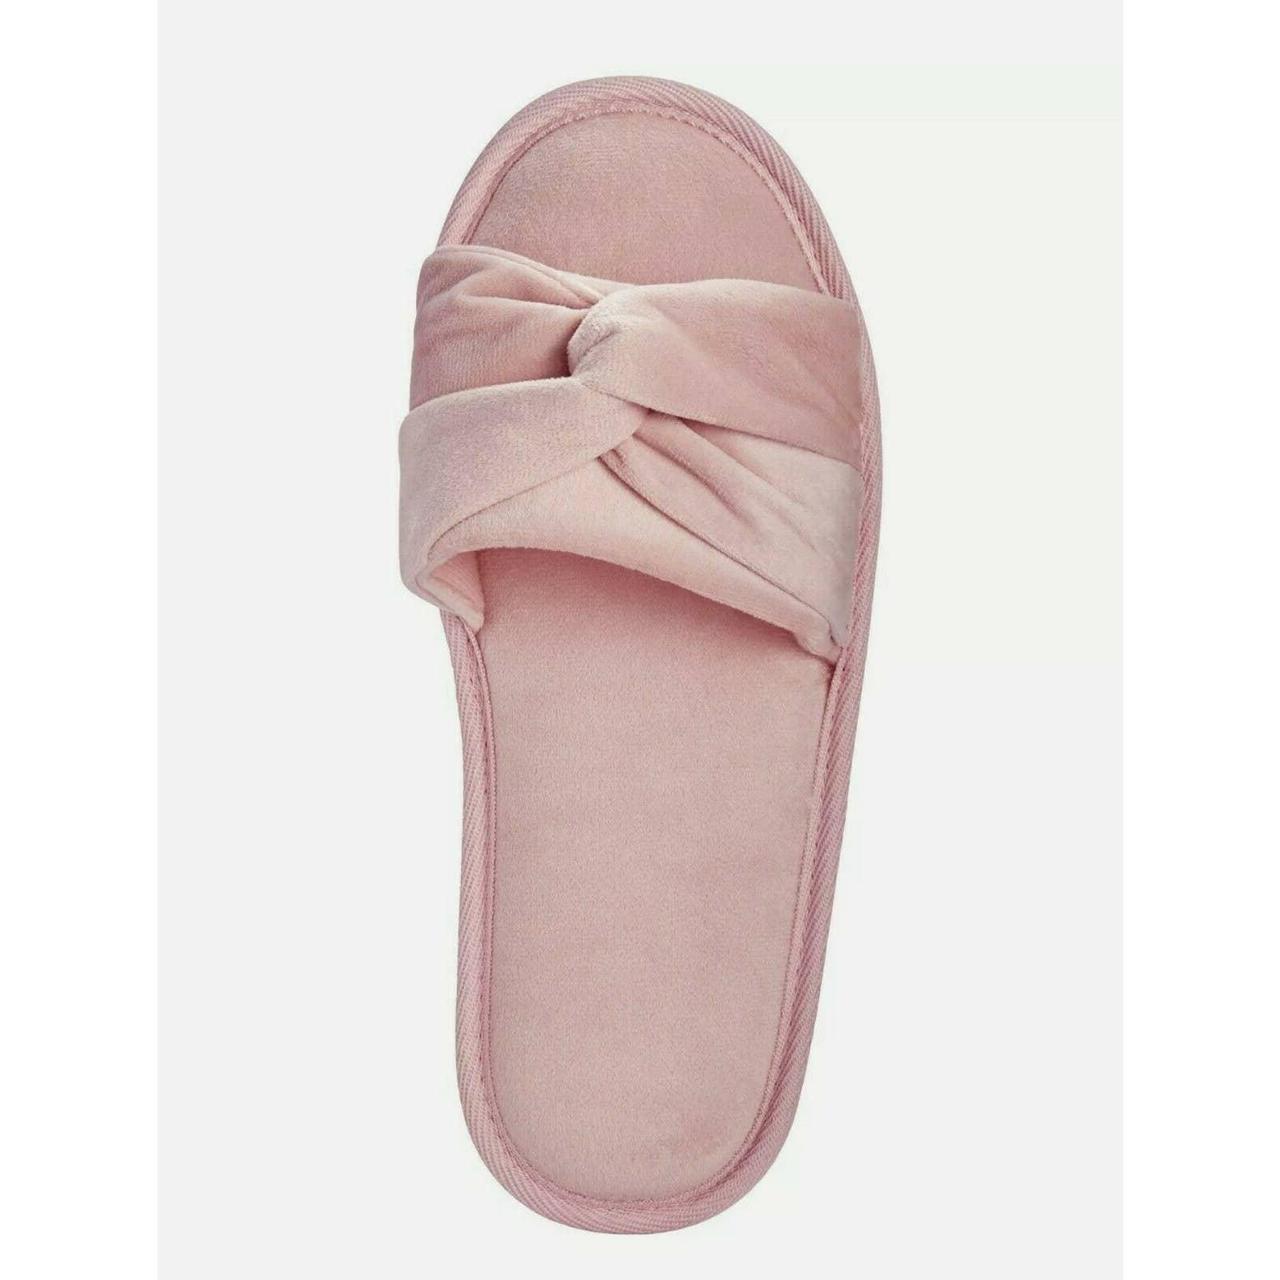 Charter Club Women's Pink Slippers